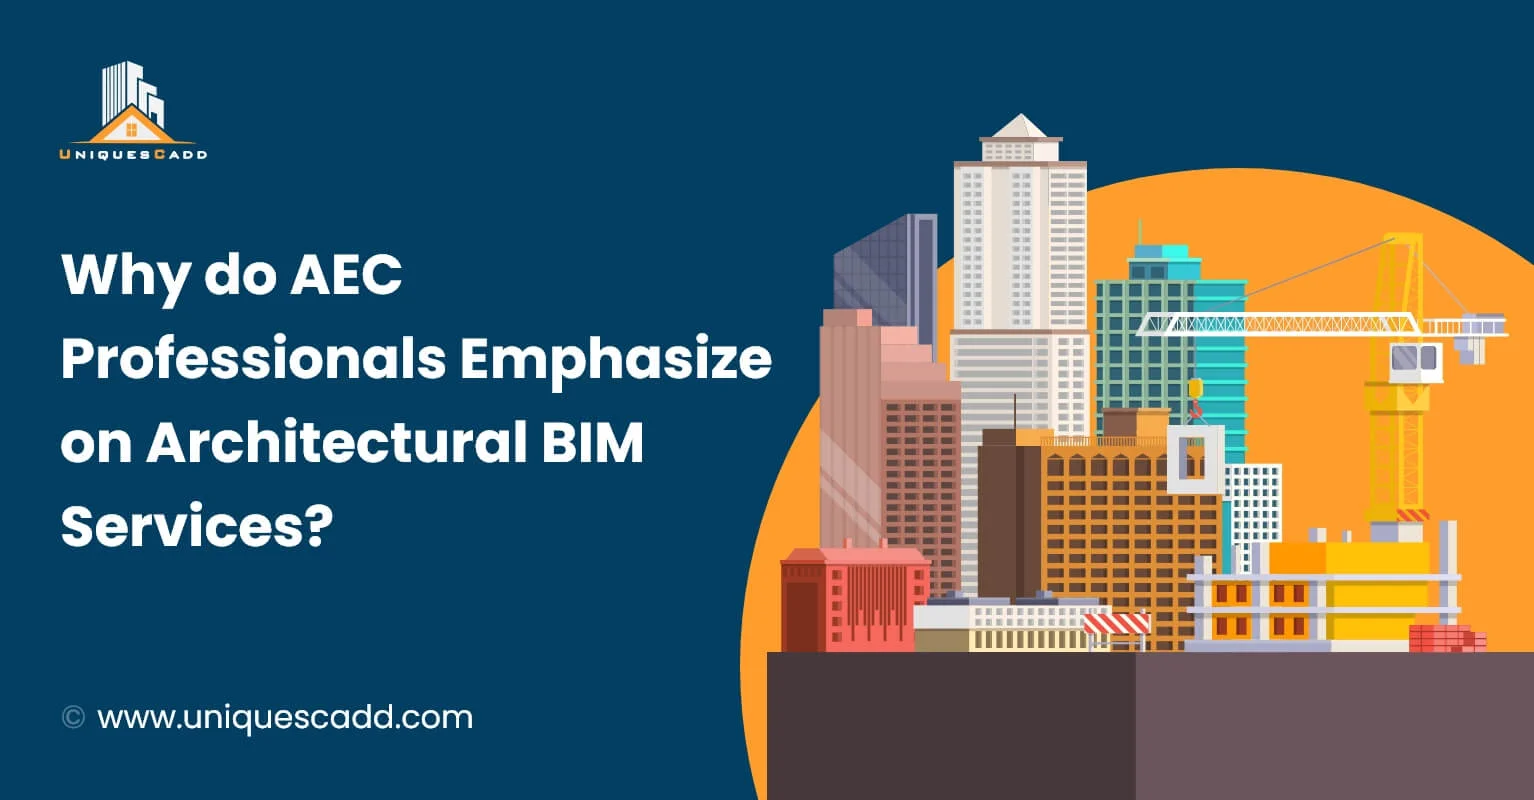 Why do AEC Professionals Emphasize on Architectural BIM Services